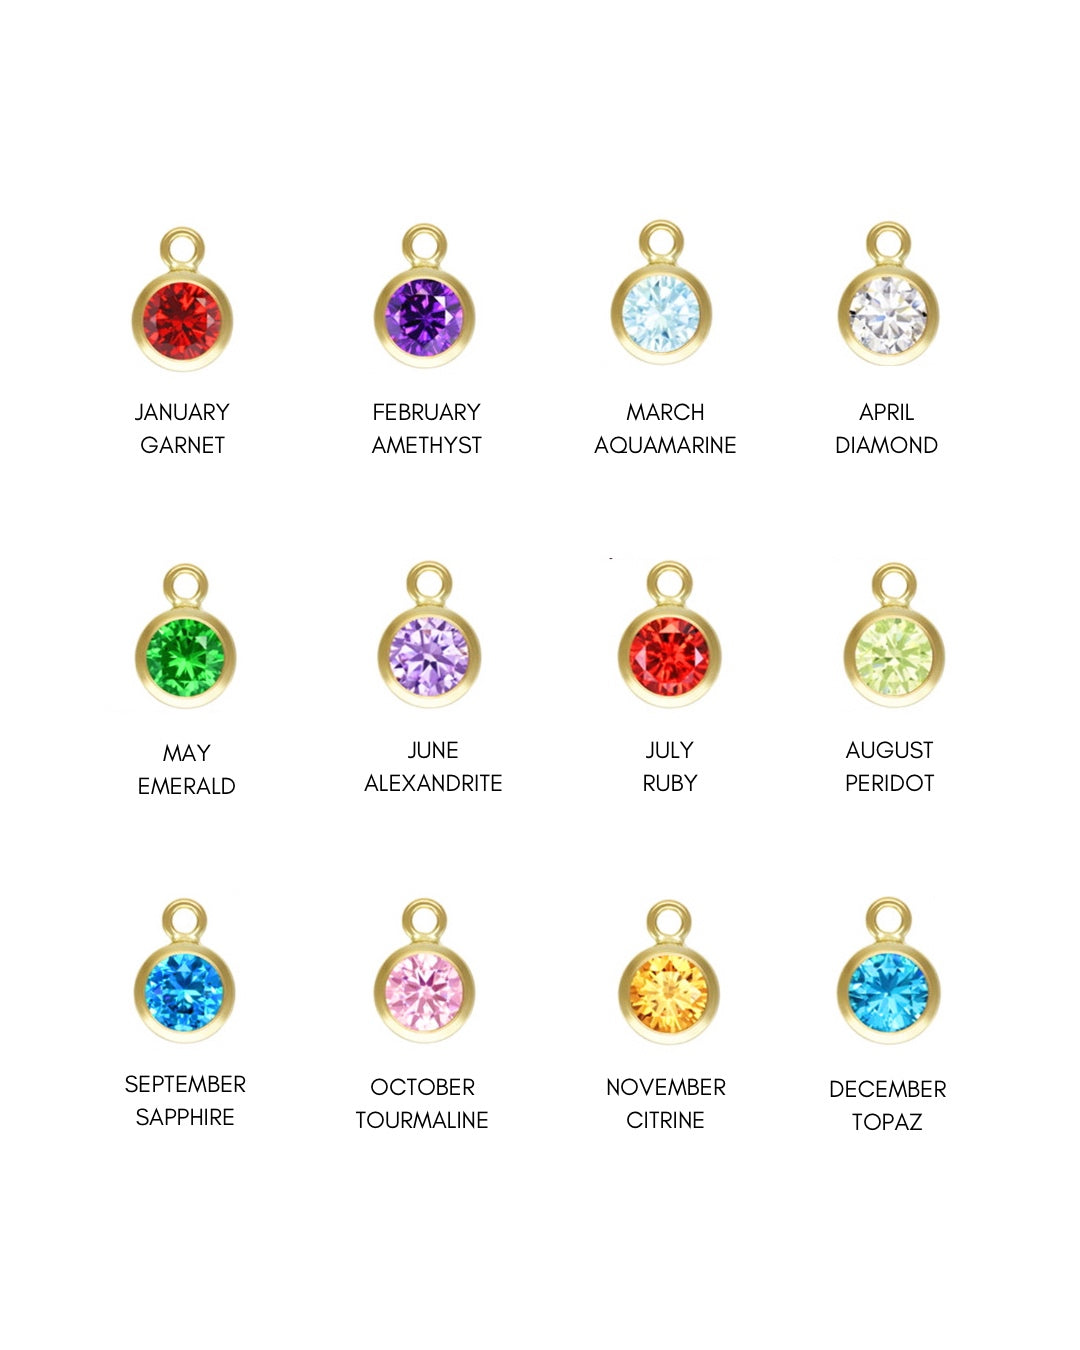 Gold Petite Birthstone Colours and Months, including January Garnet, February Amethyst, March Aquamarine, April Diamond, May Emerald, June Alexandrite, July Ruby, August Peridot, September Sapphire, October Tourmaline, November Citrine and December Topaz Cubic Zirconia Crystals